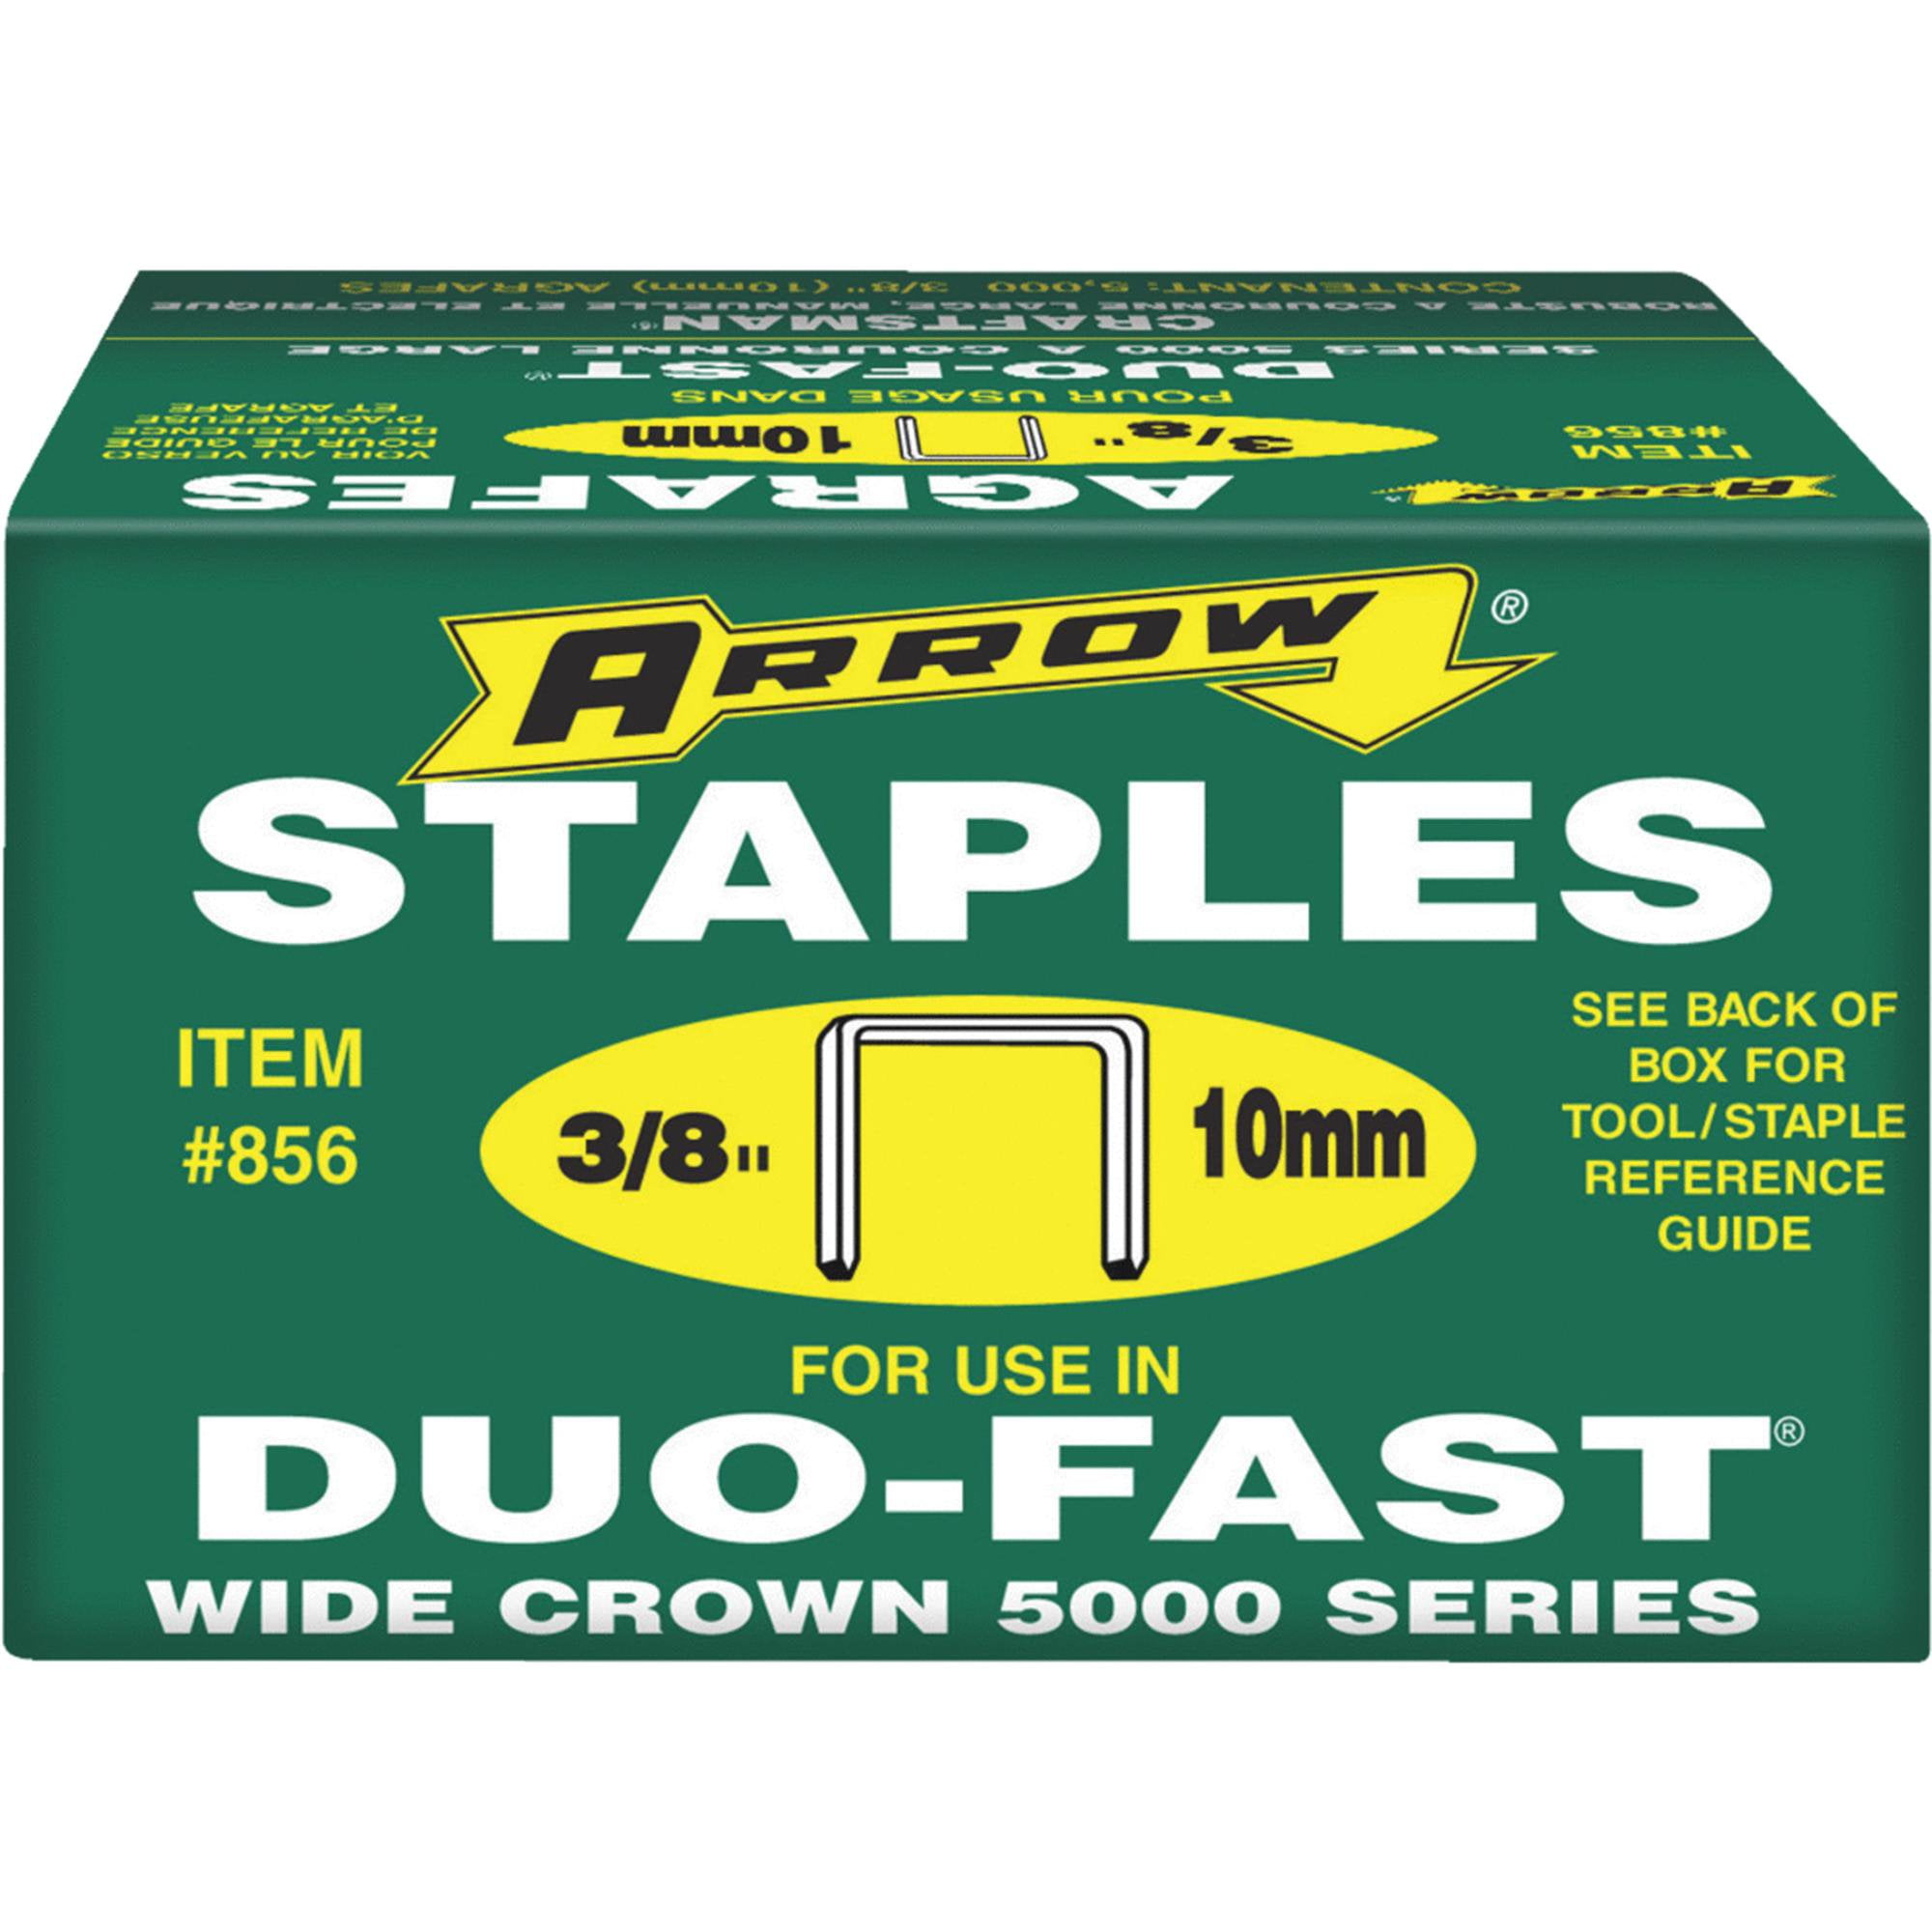 Duo-Fast 3/8" Galvanized Wide Crown Staples 